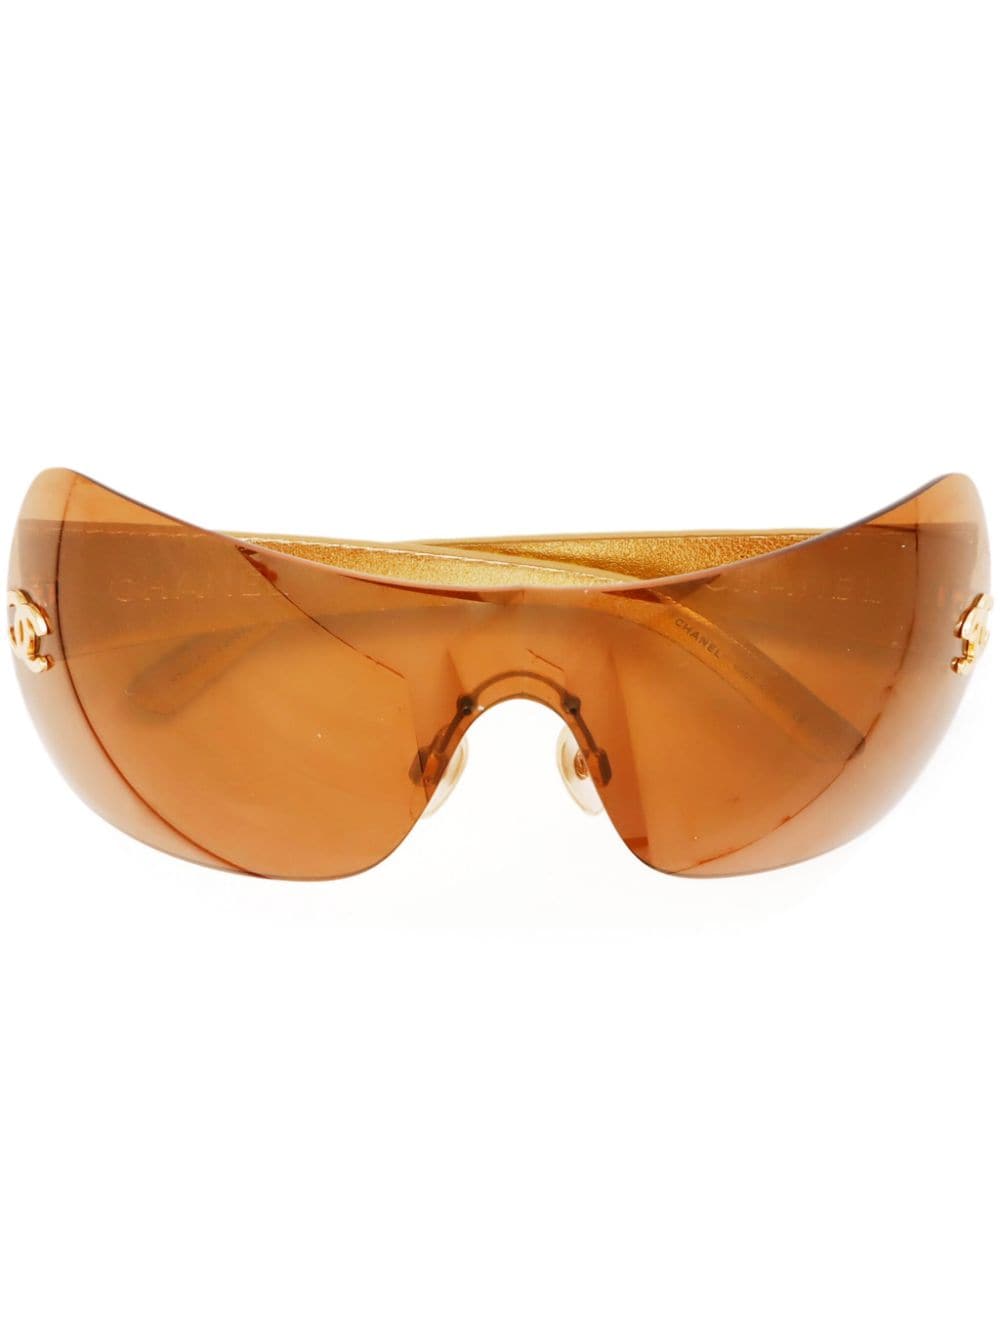 CHANEL Pre-Owned 2000 CC rimless sunglasses - Gold